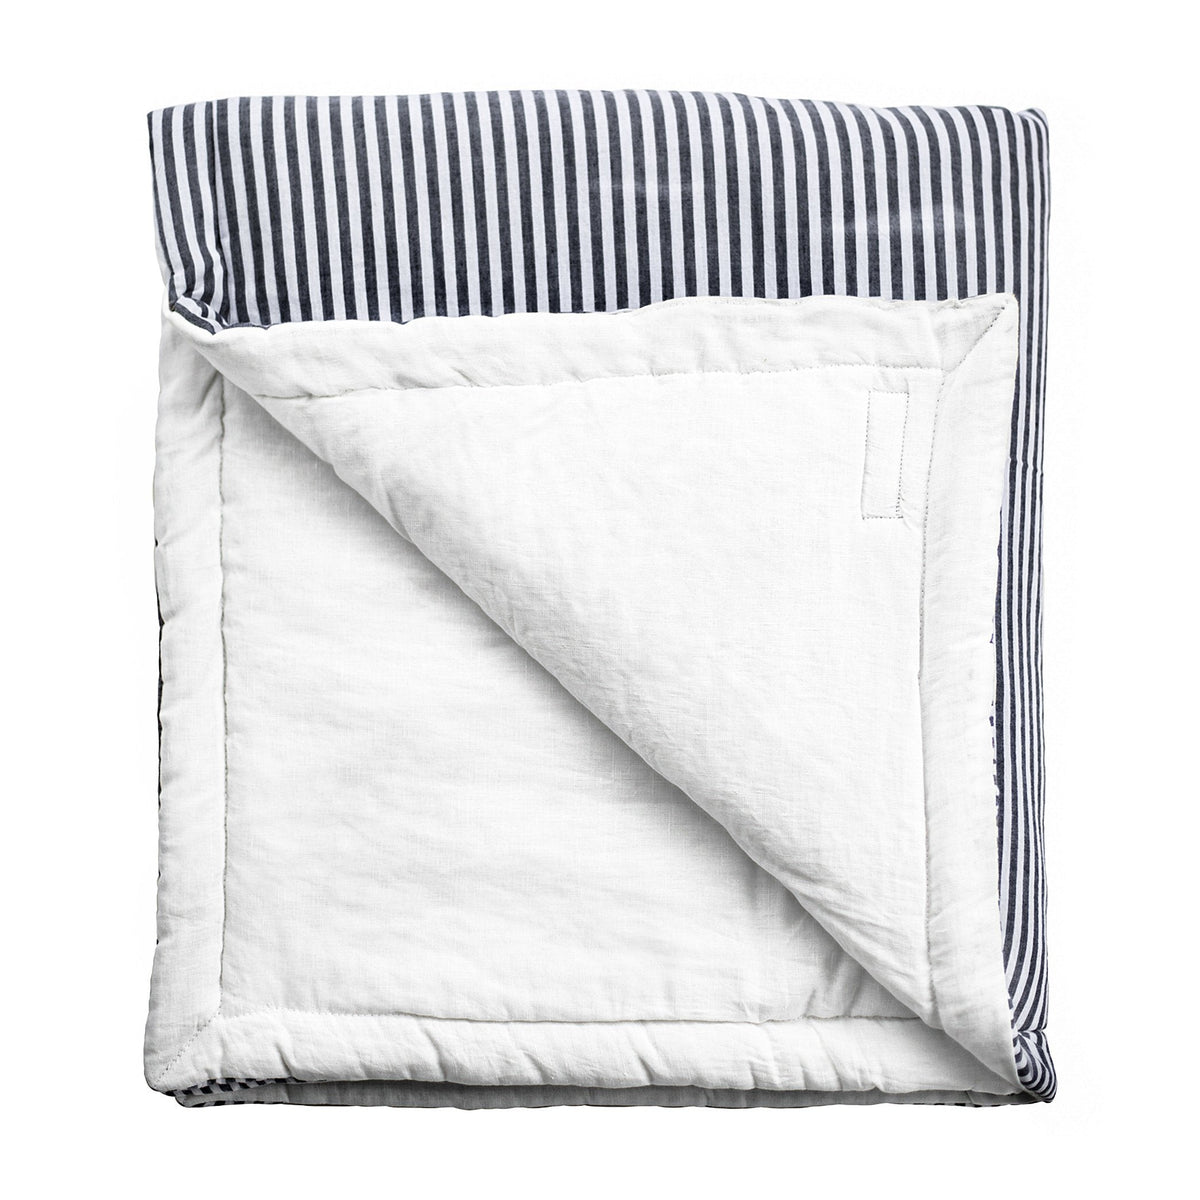 Play Mat In Harbor Island Stripe And White Linen, Reversible